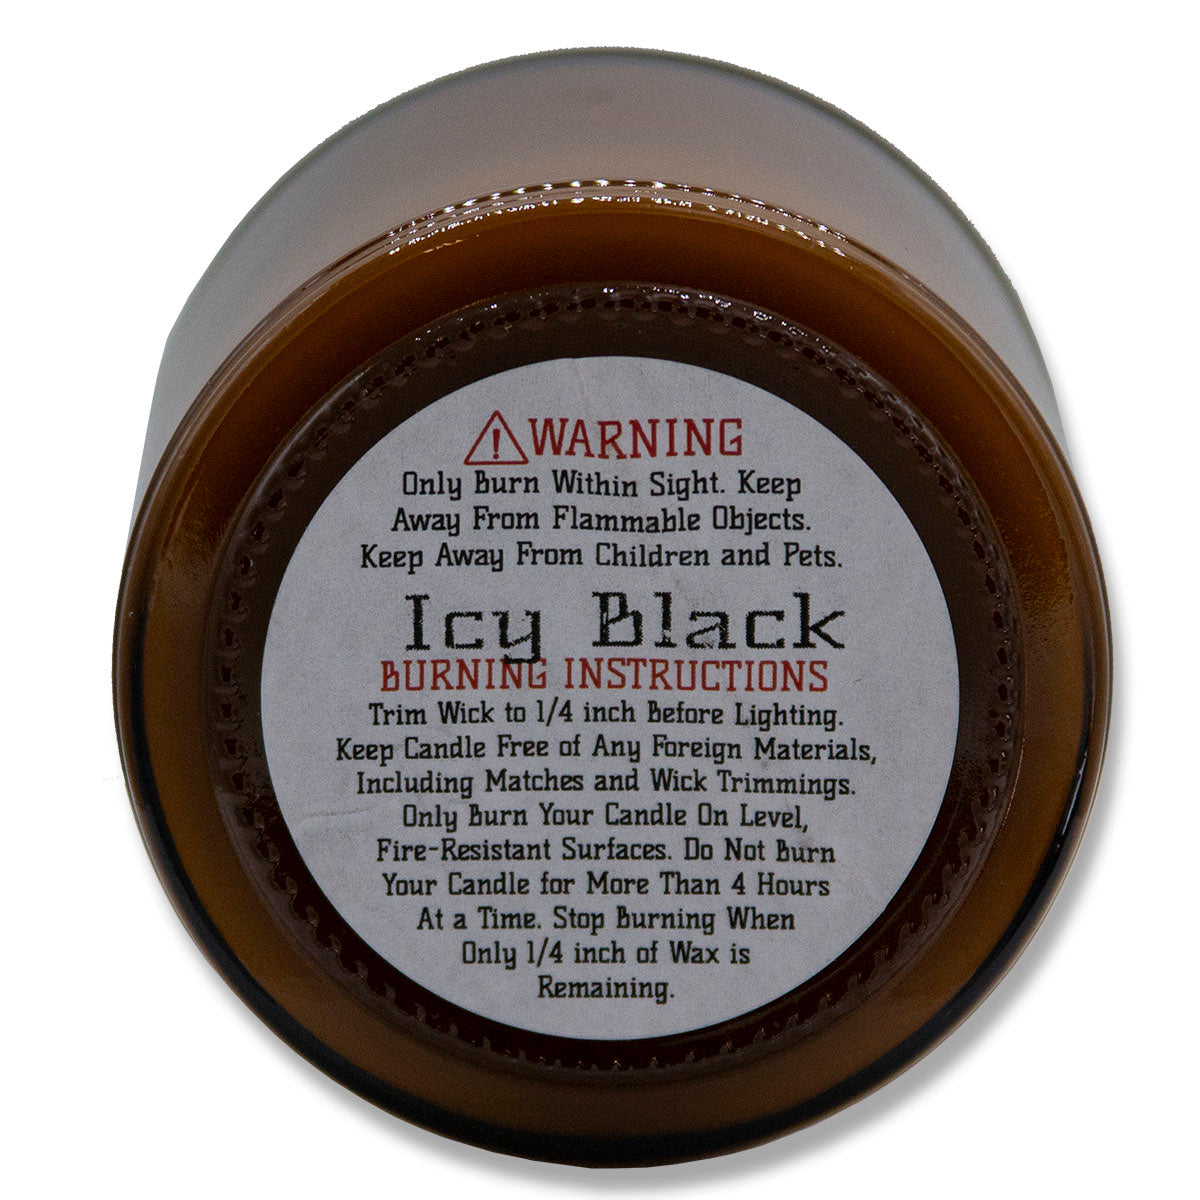 Icy Black, Lone Star Candles & More's Premium Hand Poured Strong Scented Soy Wax Gift Candle, A Uniquely Masculine and Earthy Blend, USA Made in Texas, Amber Glass Jars, 9oz Best Mom